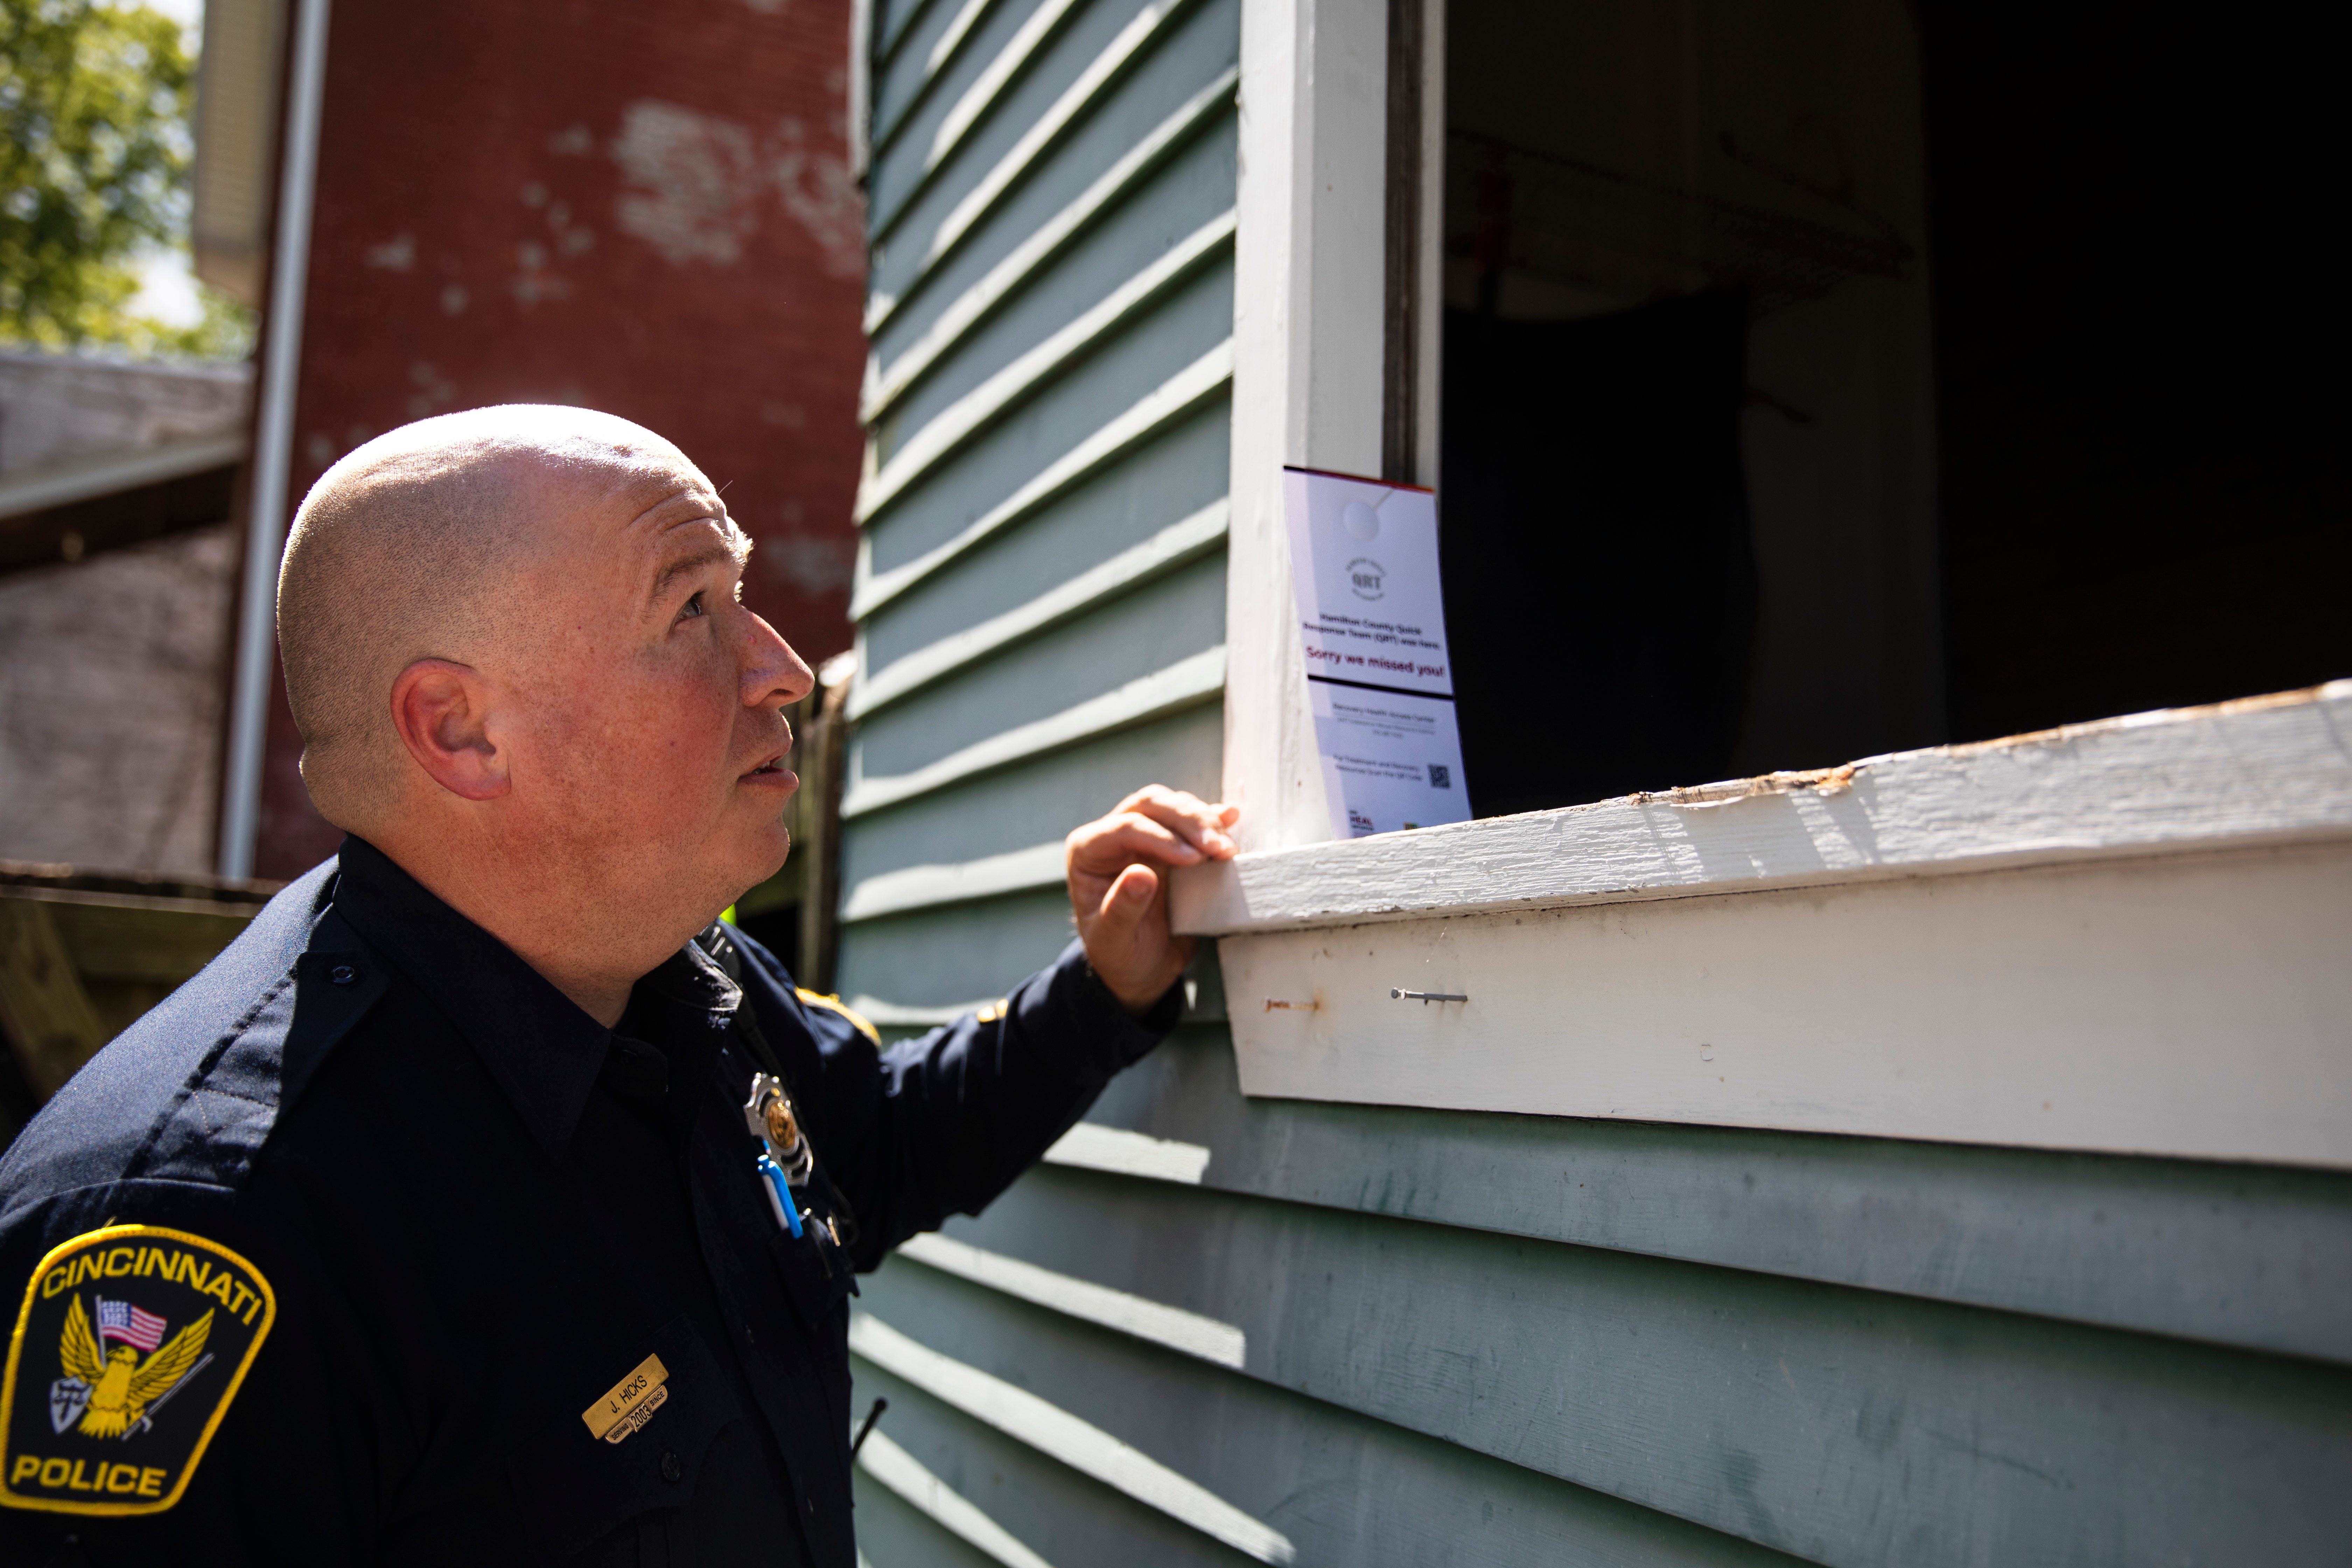 Police Sgt. Jacob Hicks, who leads the Cincinnati Police District 3 Neighborhood Liaison Unit, looks into a broken window at a vacant house that's received complaints about drug use. Hicks' team will find the landlord and work to clean up the property to ensure it does not remain a place for drug use. Instead of simply chasing away or arresting any drug users at these sites, police partner with outreach workers to offer help to prevent overdose and assist them through recovery.